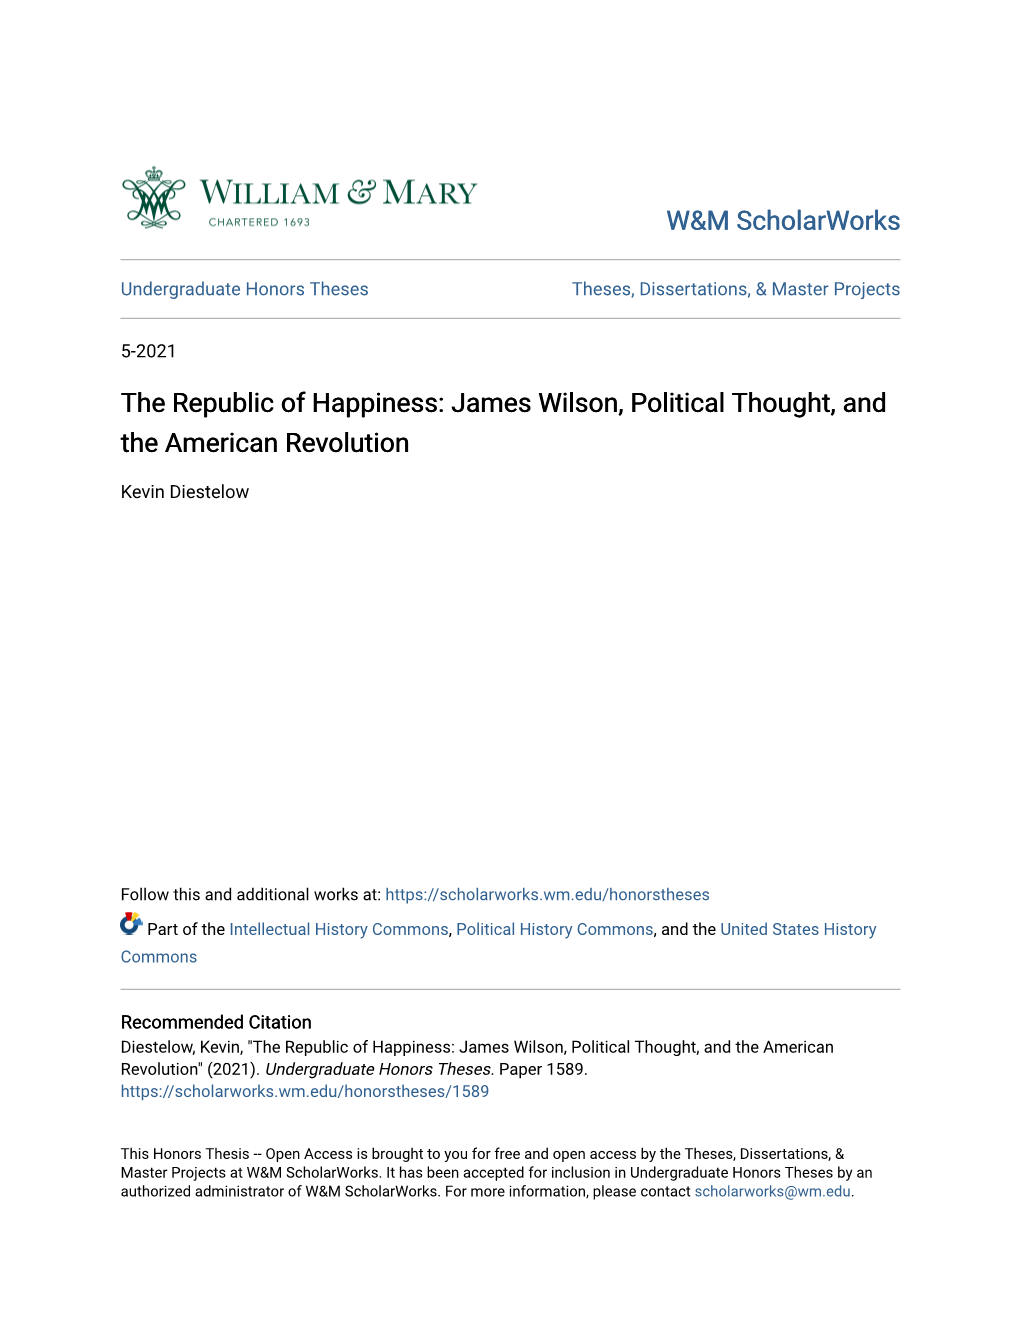 James Wilson, Political Thought, and the American Revolution